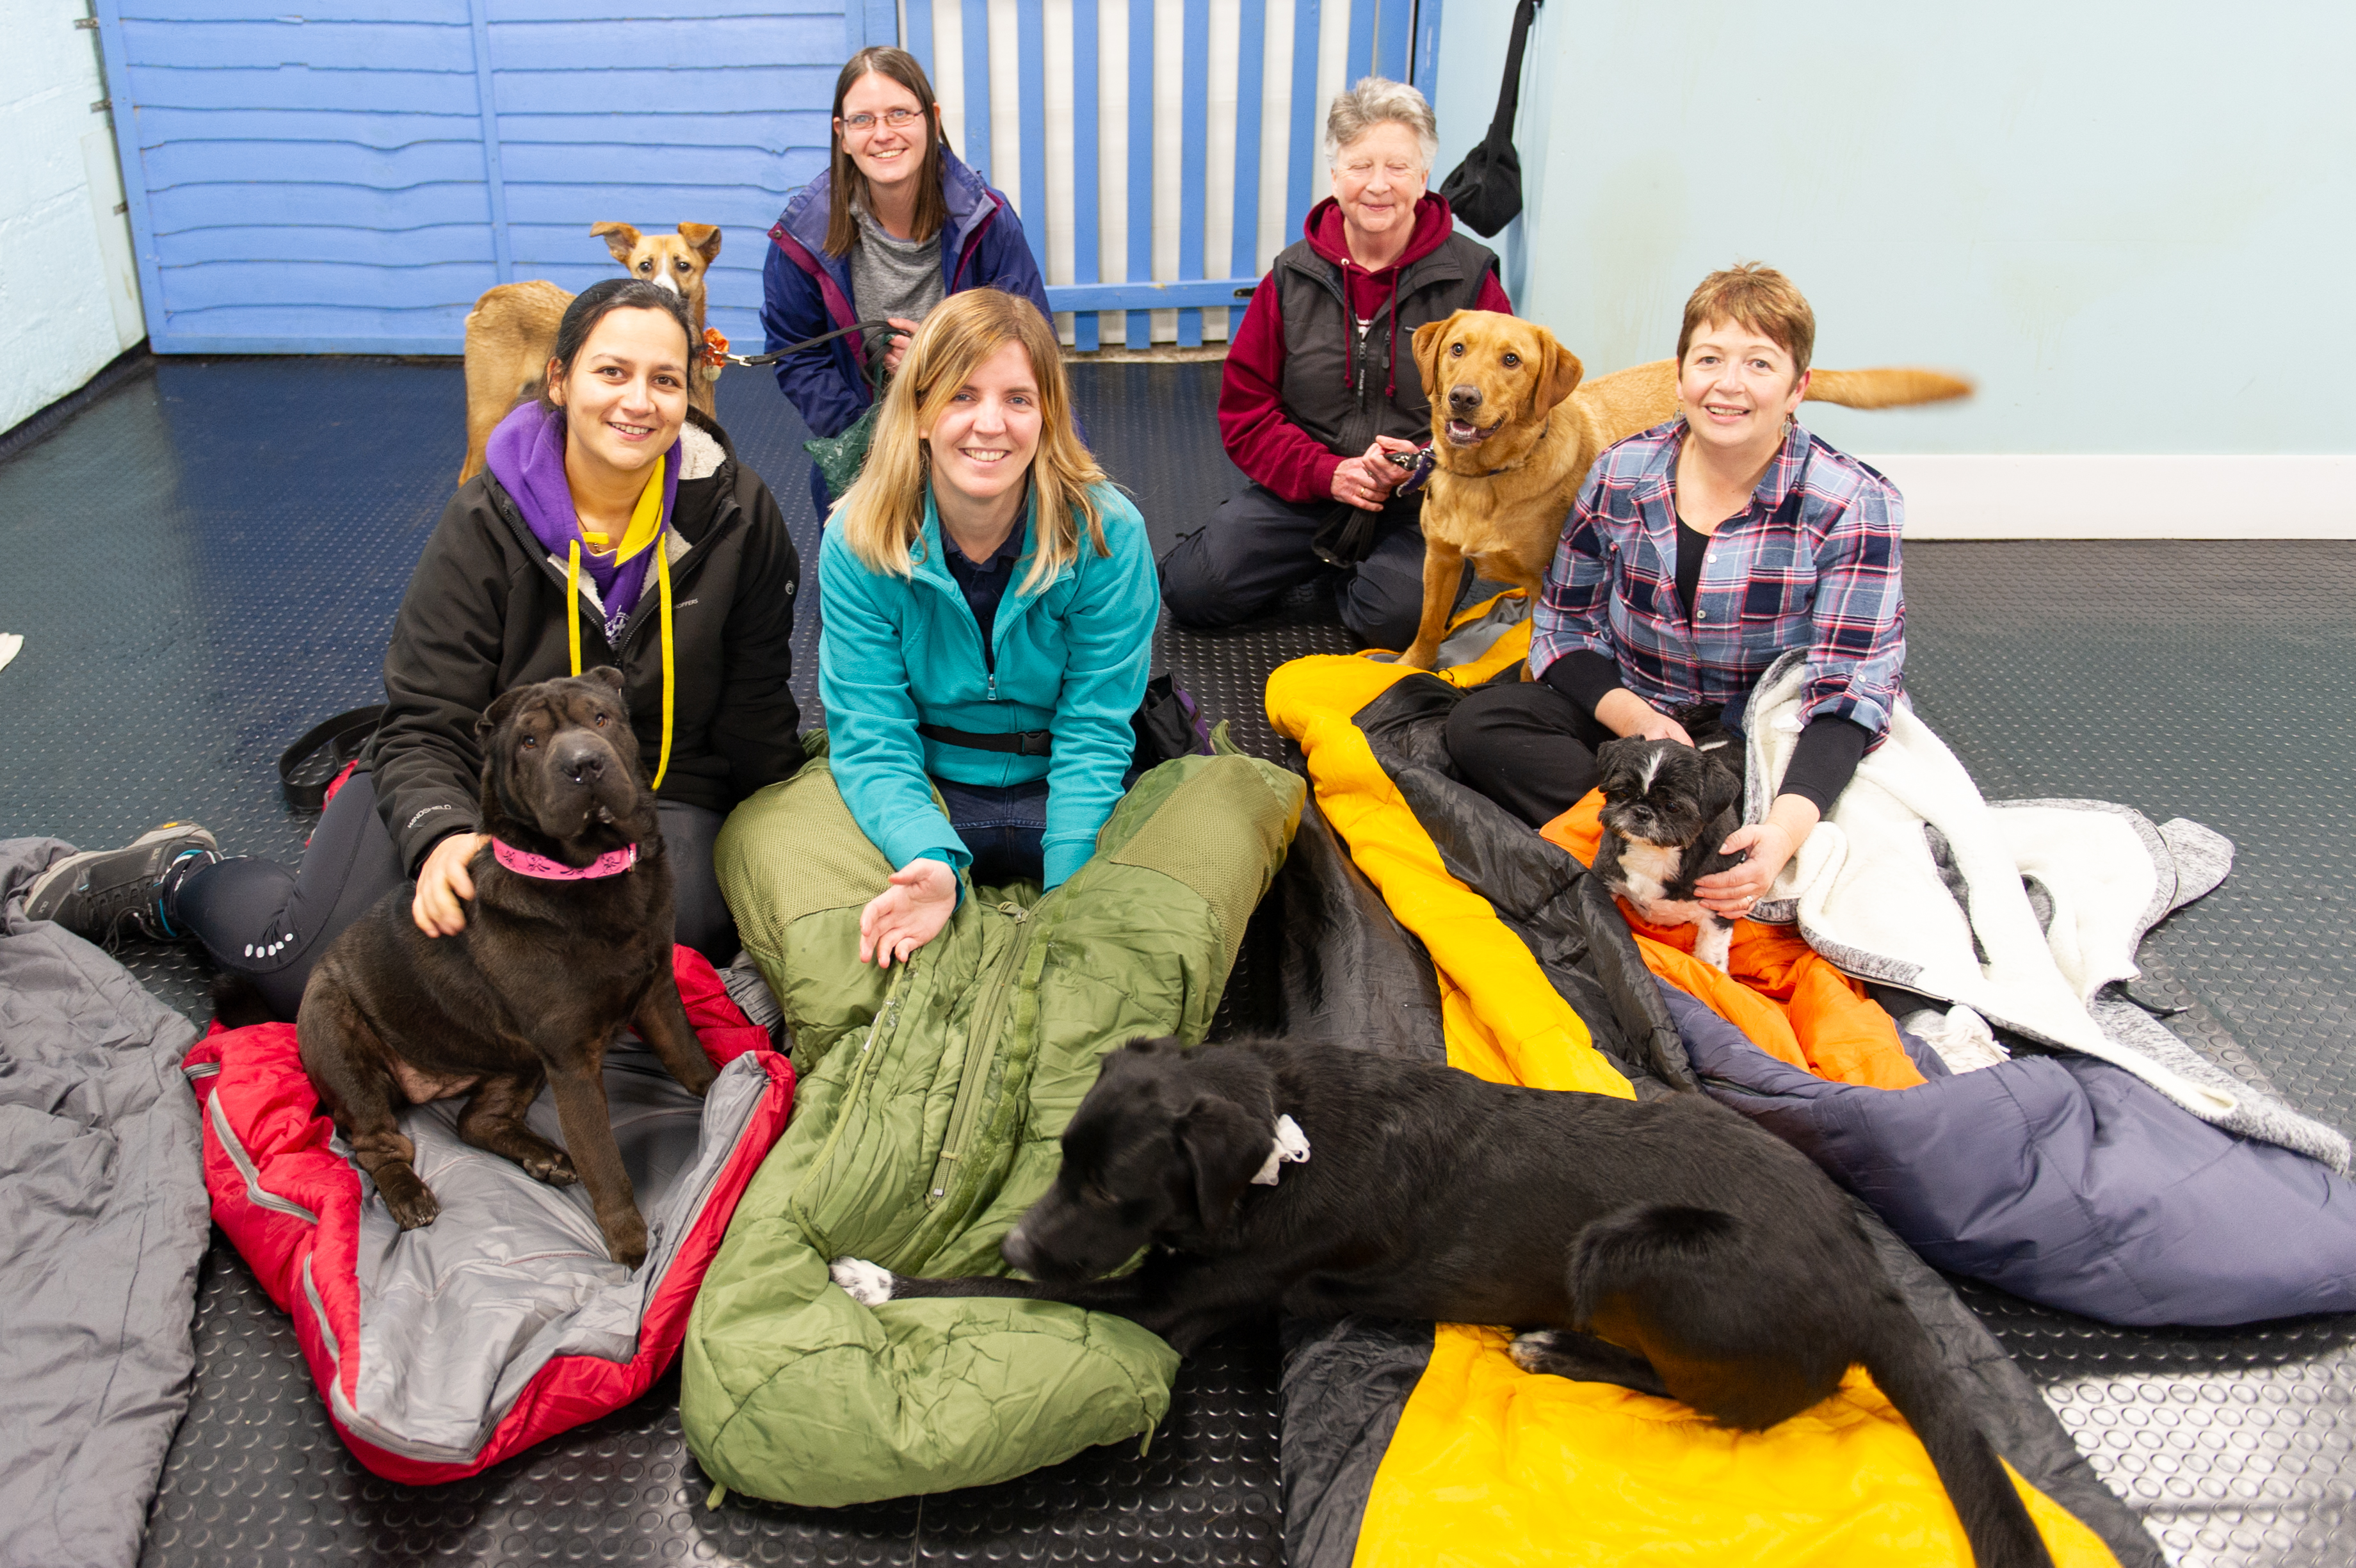 Five brave volunteers and their dogs bed down at Perth pet centre. From left: Aaren Chacko with Raisin, Claire Downie with Kipper, Elaine MacFarlane with Oran, Judy Heyes with Reiver and Jan Stewart with Jasmine.